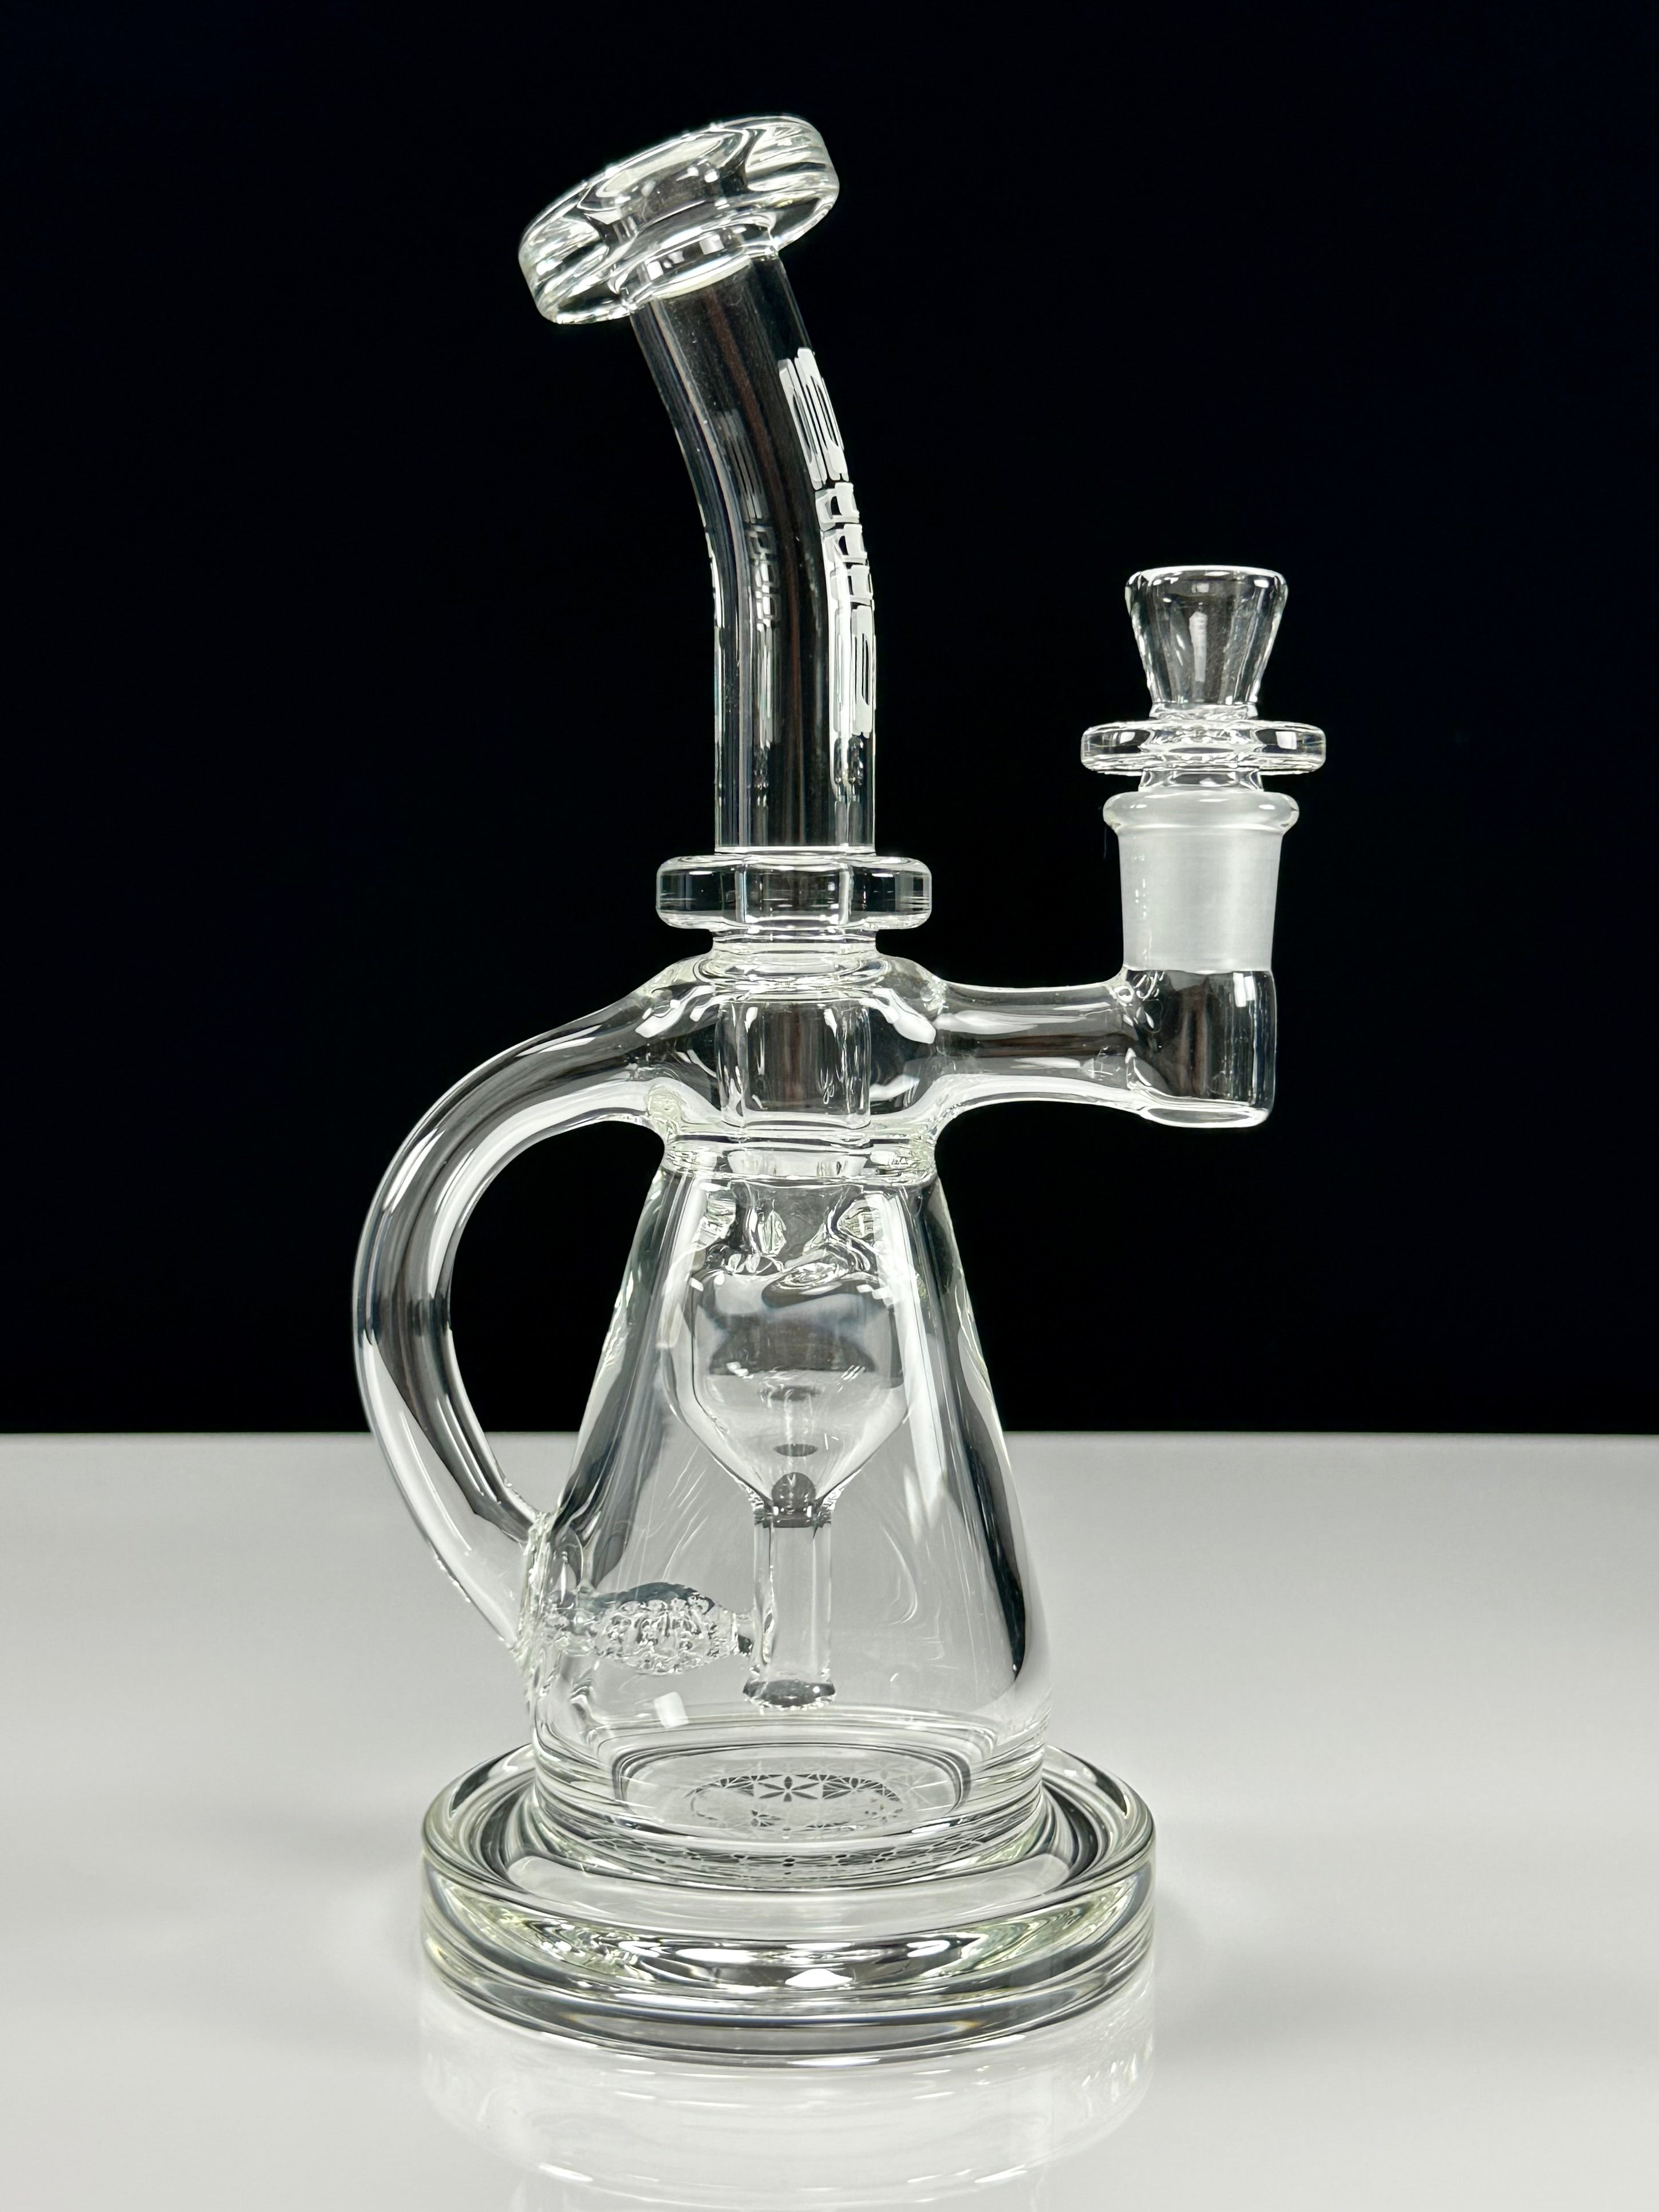 ILL Glass Fusion B Incycler